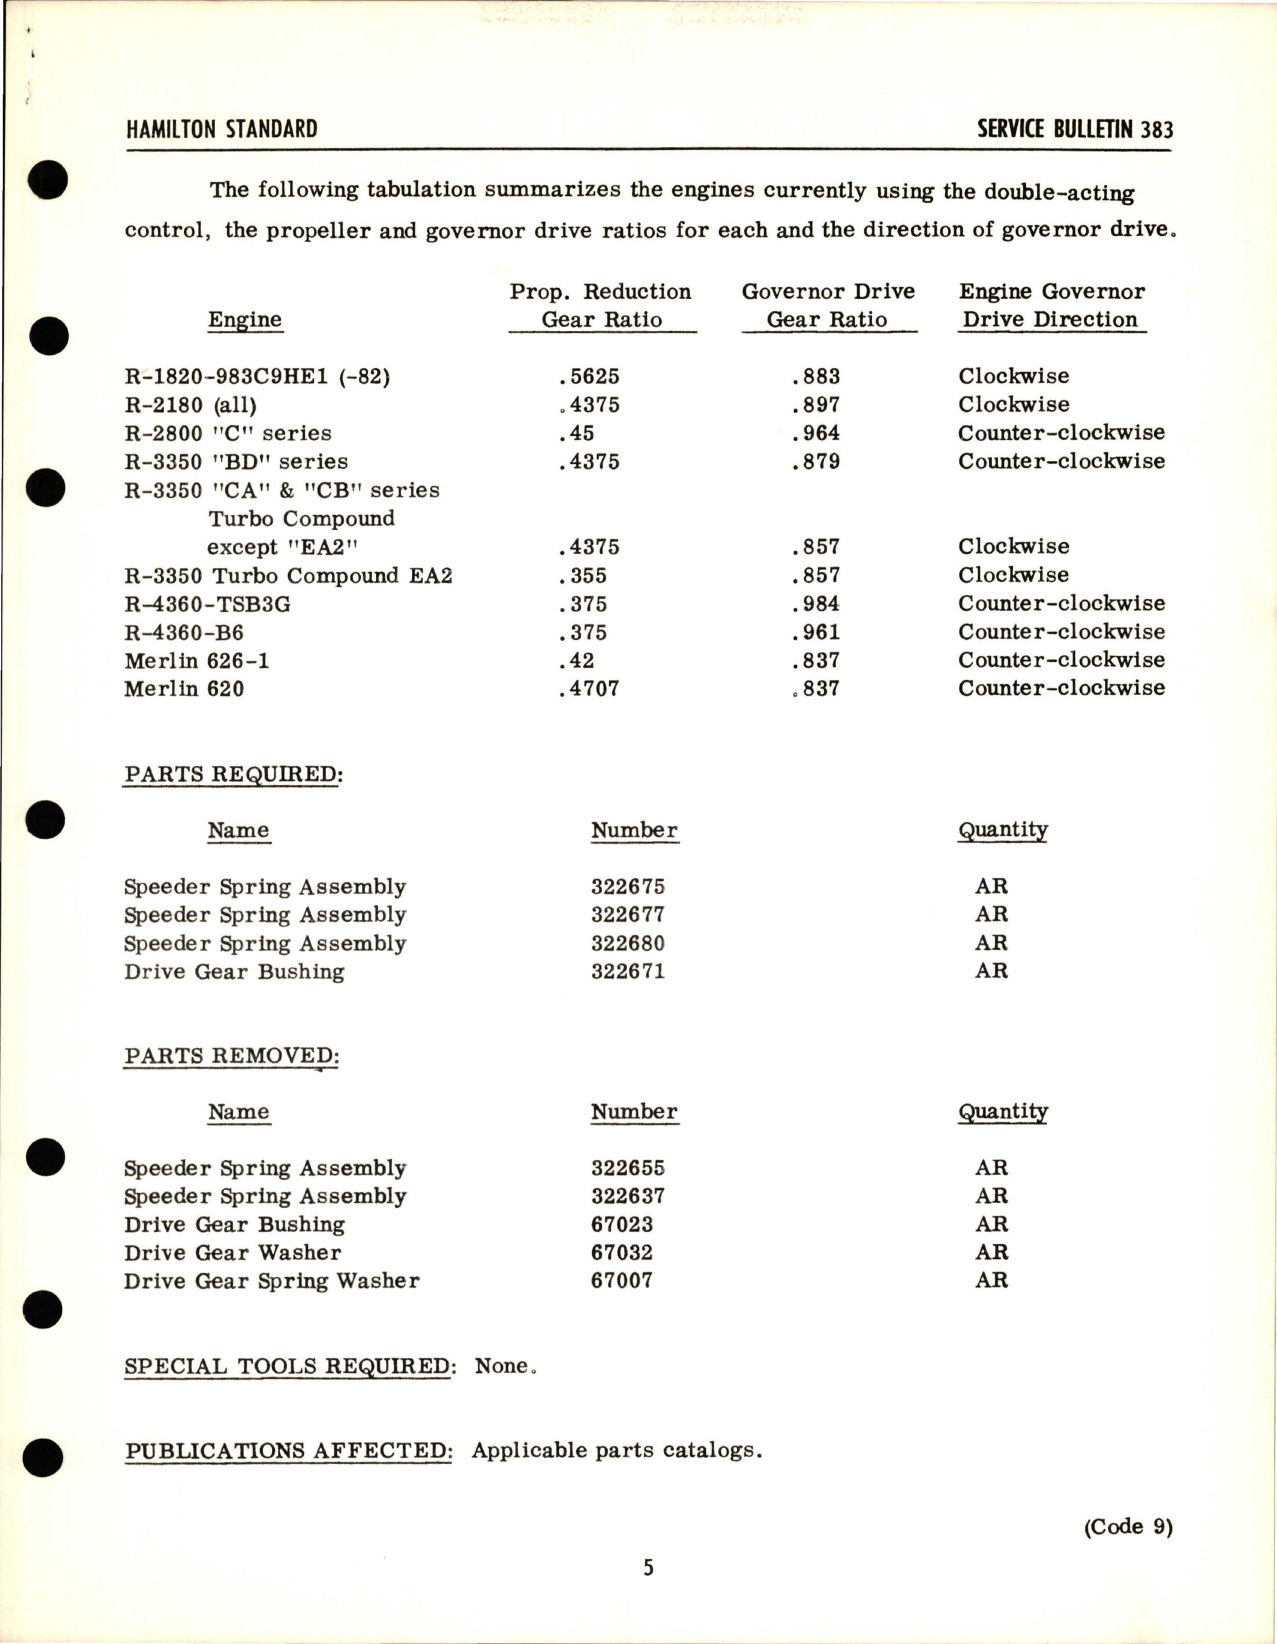 Sample page 5 from AirCorps Library document: New Control Drive Gear Bushings and Speeder Springs